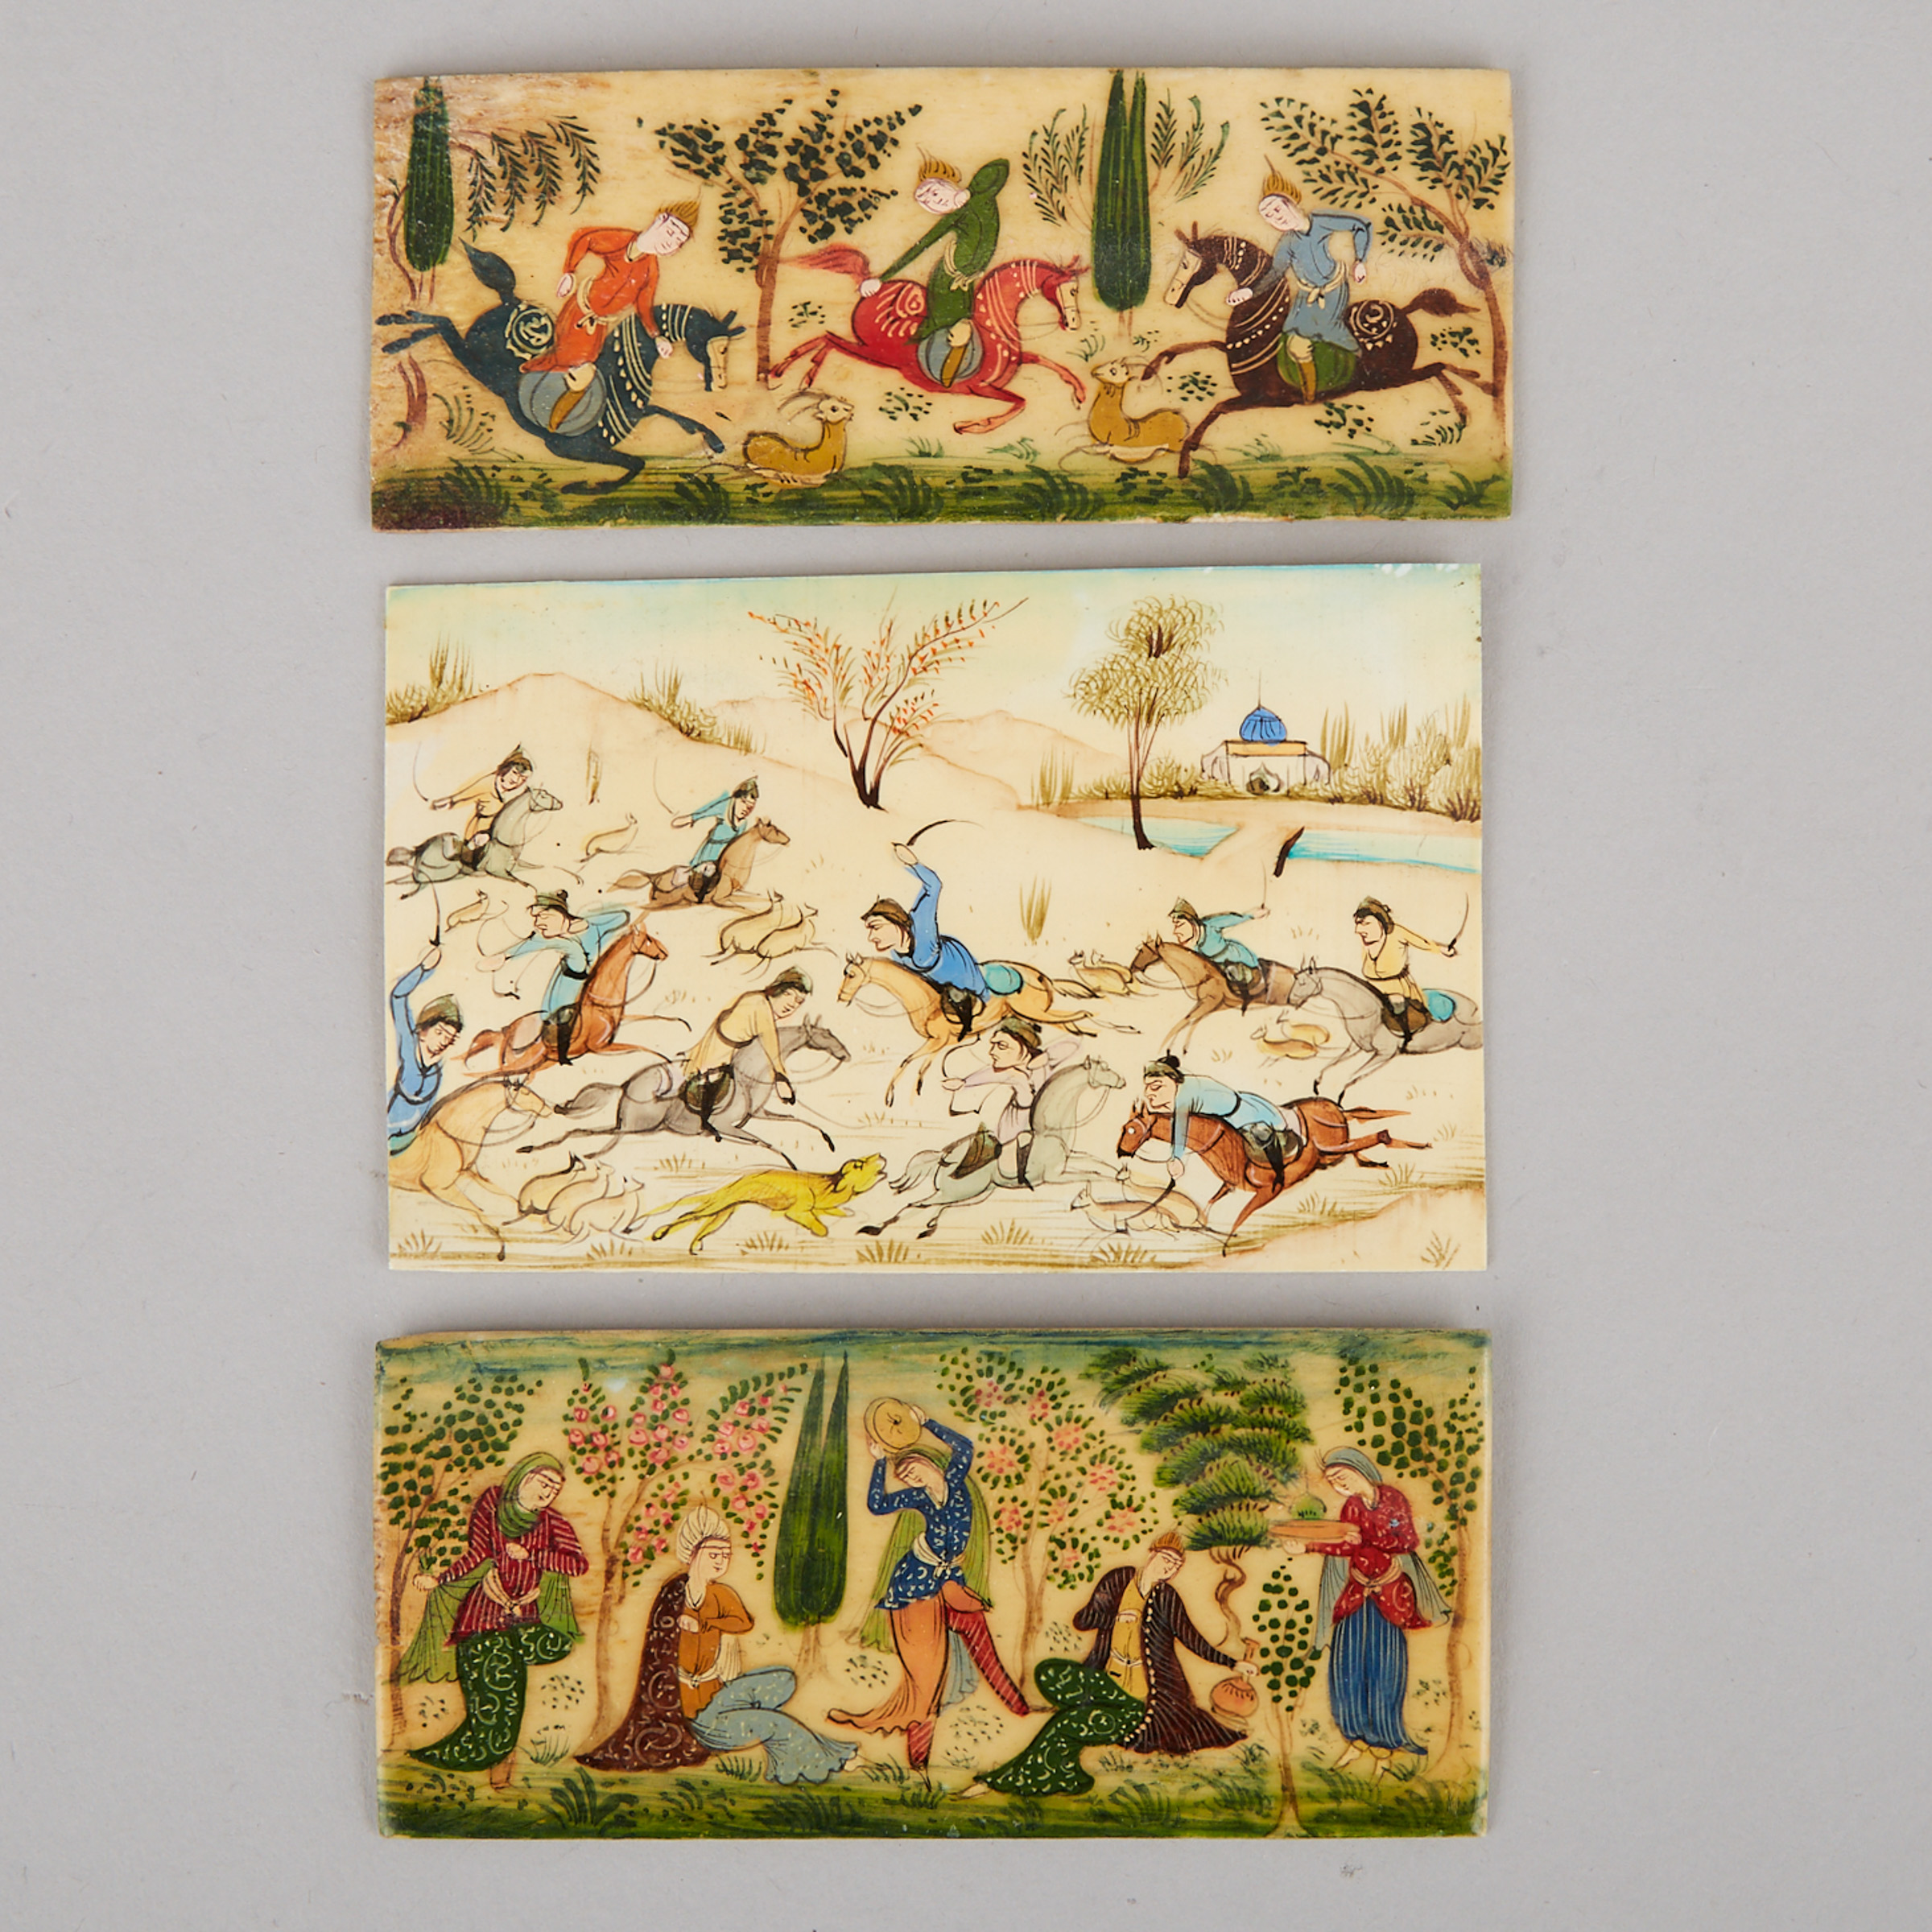 Three Persian Miniature Paintings on Ivory Panels, 19th early 20th century